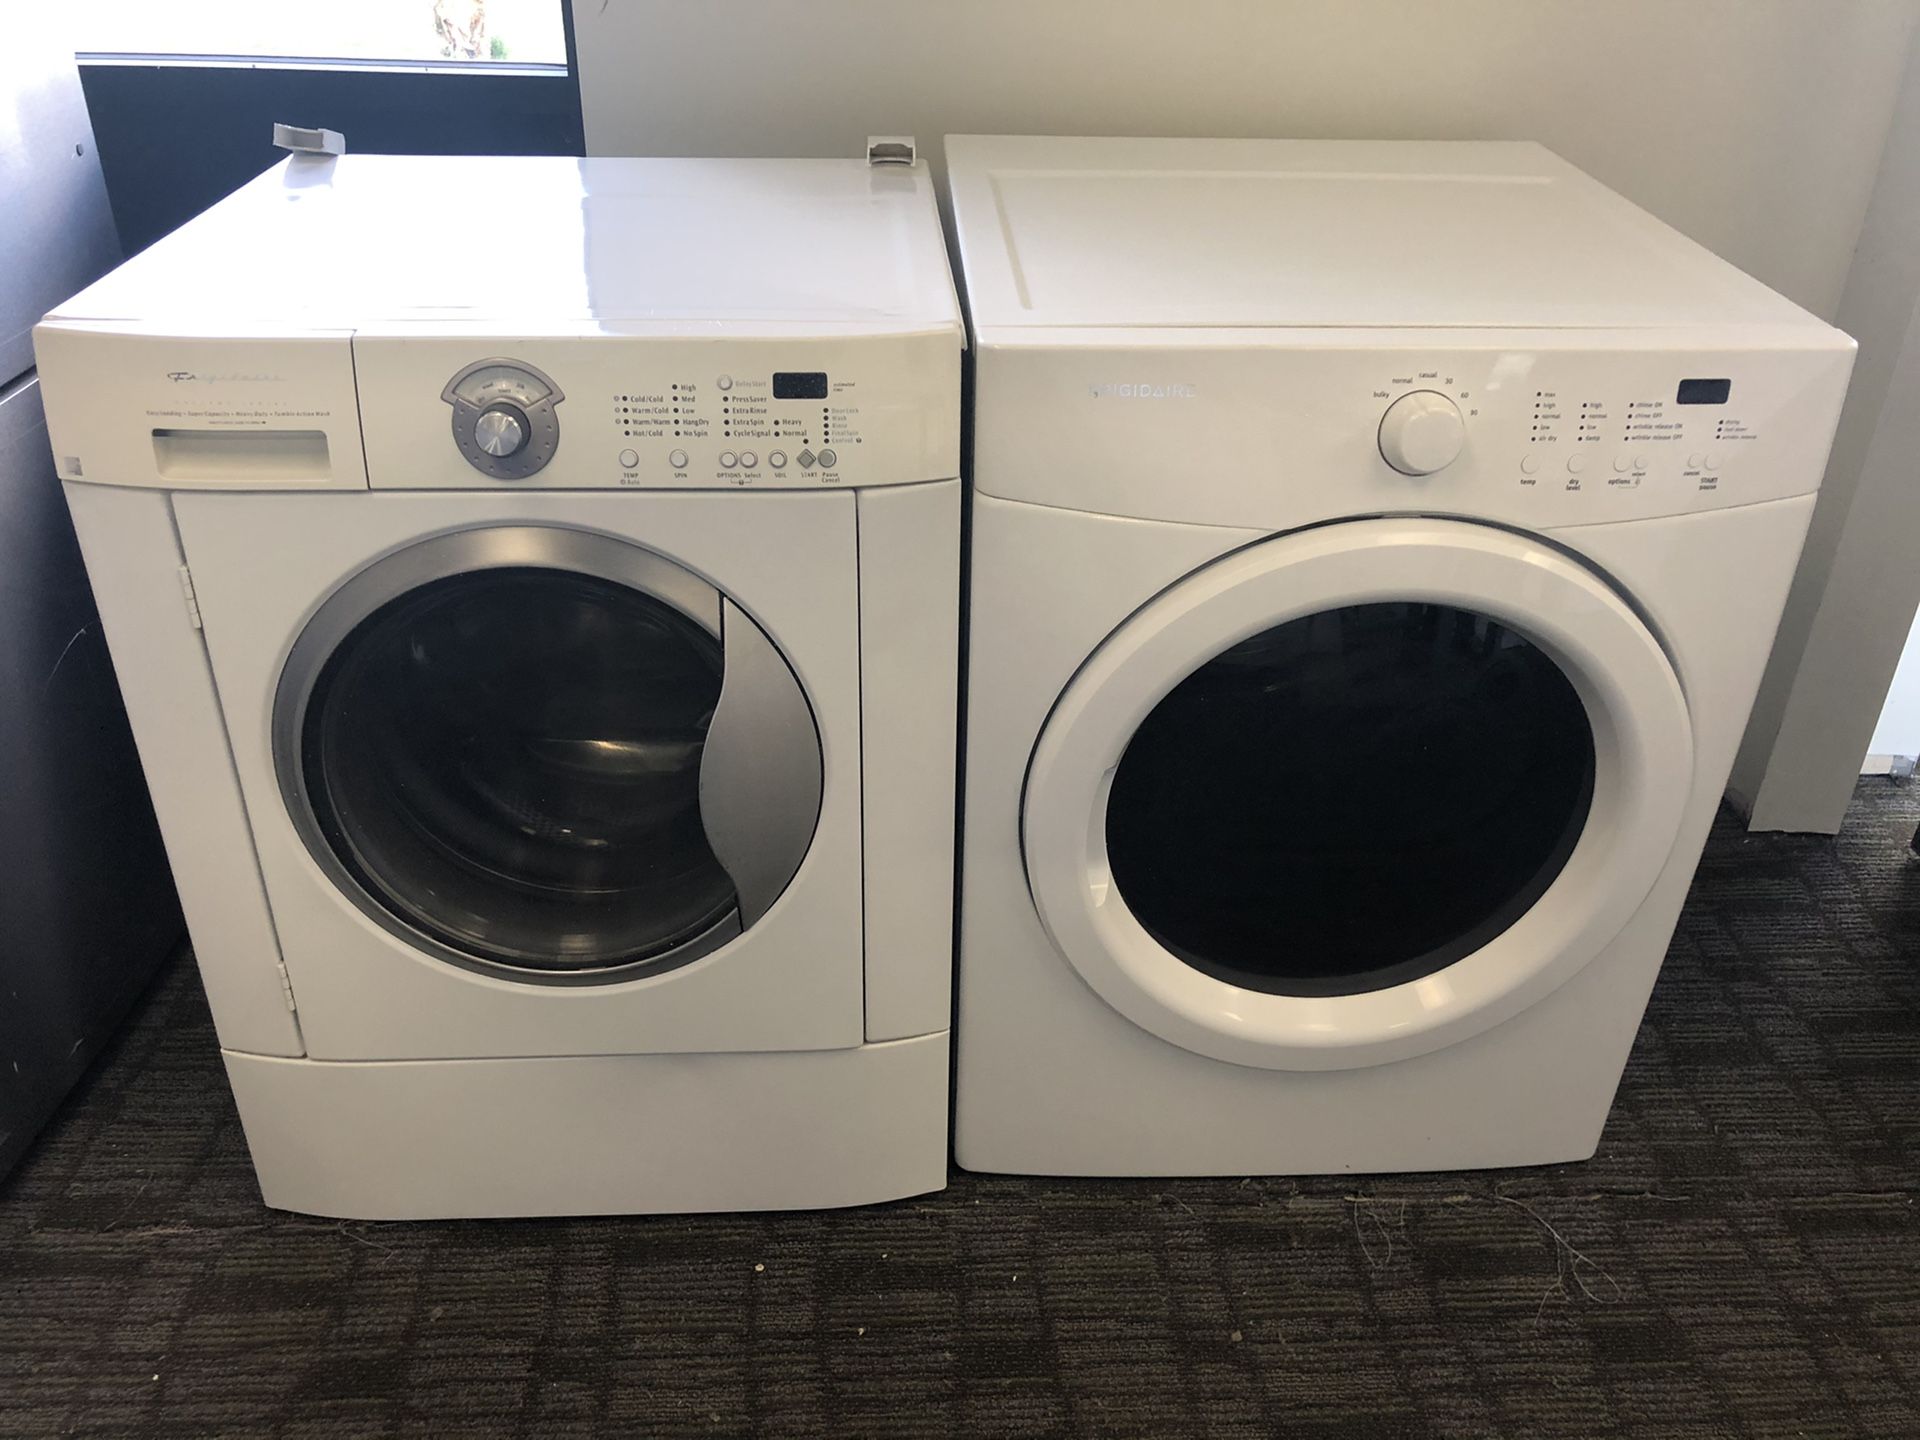 USED FRIGIDAIRE FRONT LOAD WASHER SET SUPER CAPACITY HEAVY DUTY COMES WITH 60 DAY WARRANTY